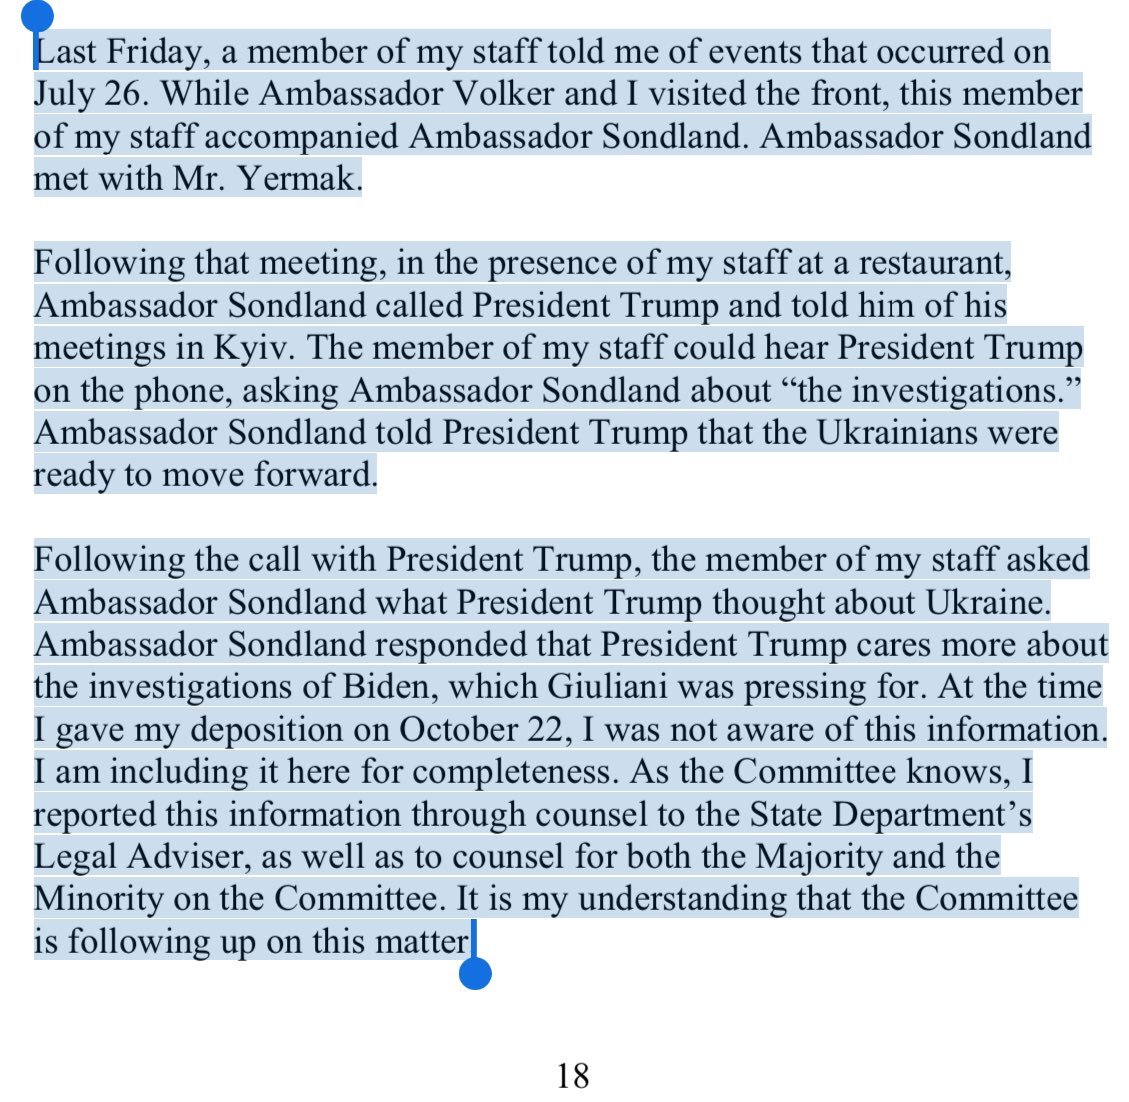 The whole passage. That Sondland took this call w/ Trump in a restaurant, was overheard, and then talked about it to a staff member...wow.